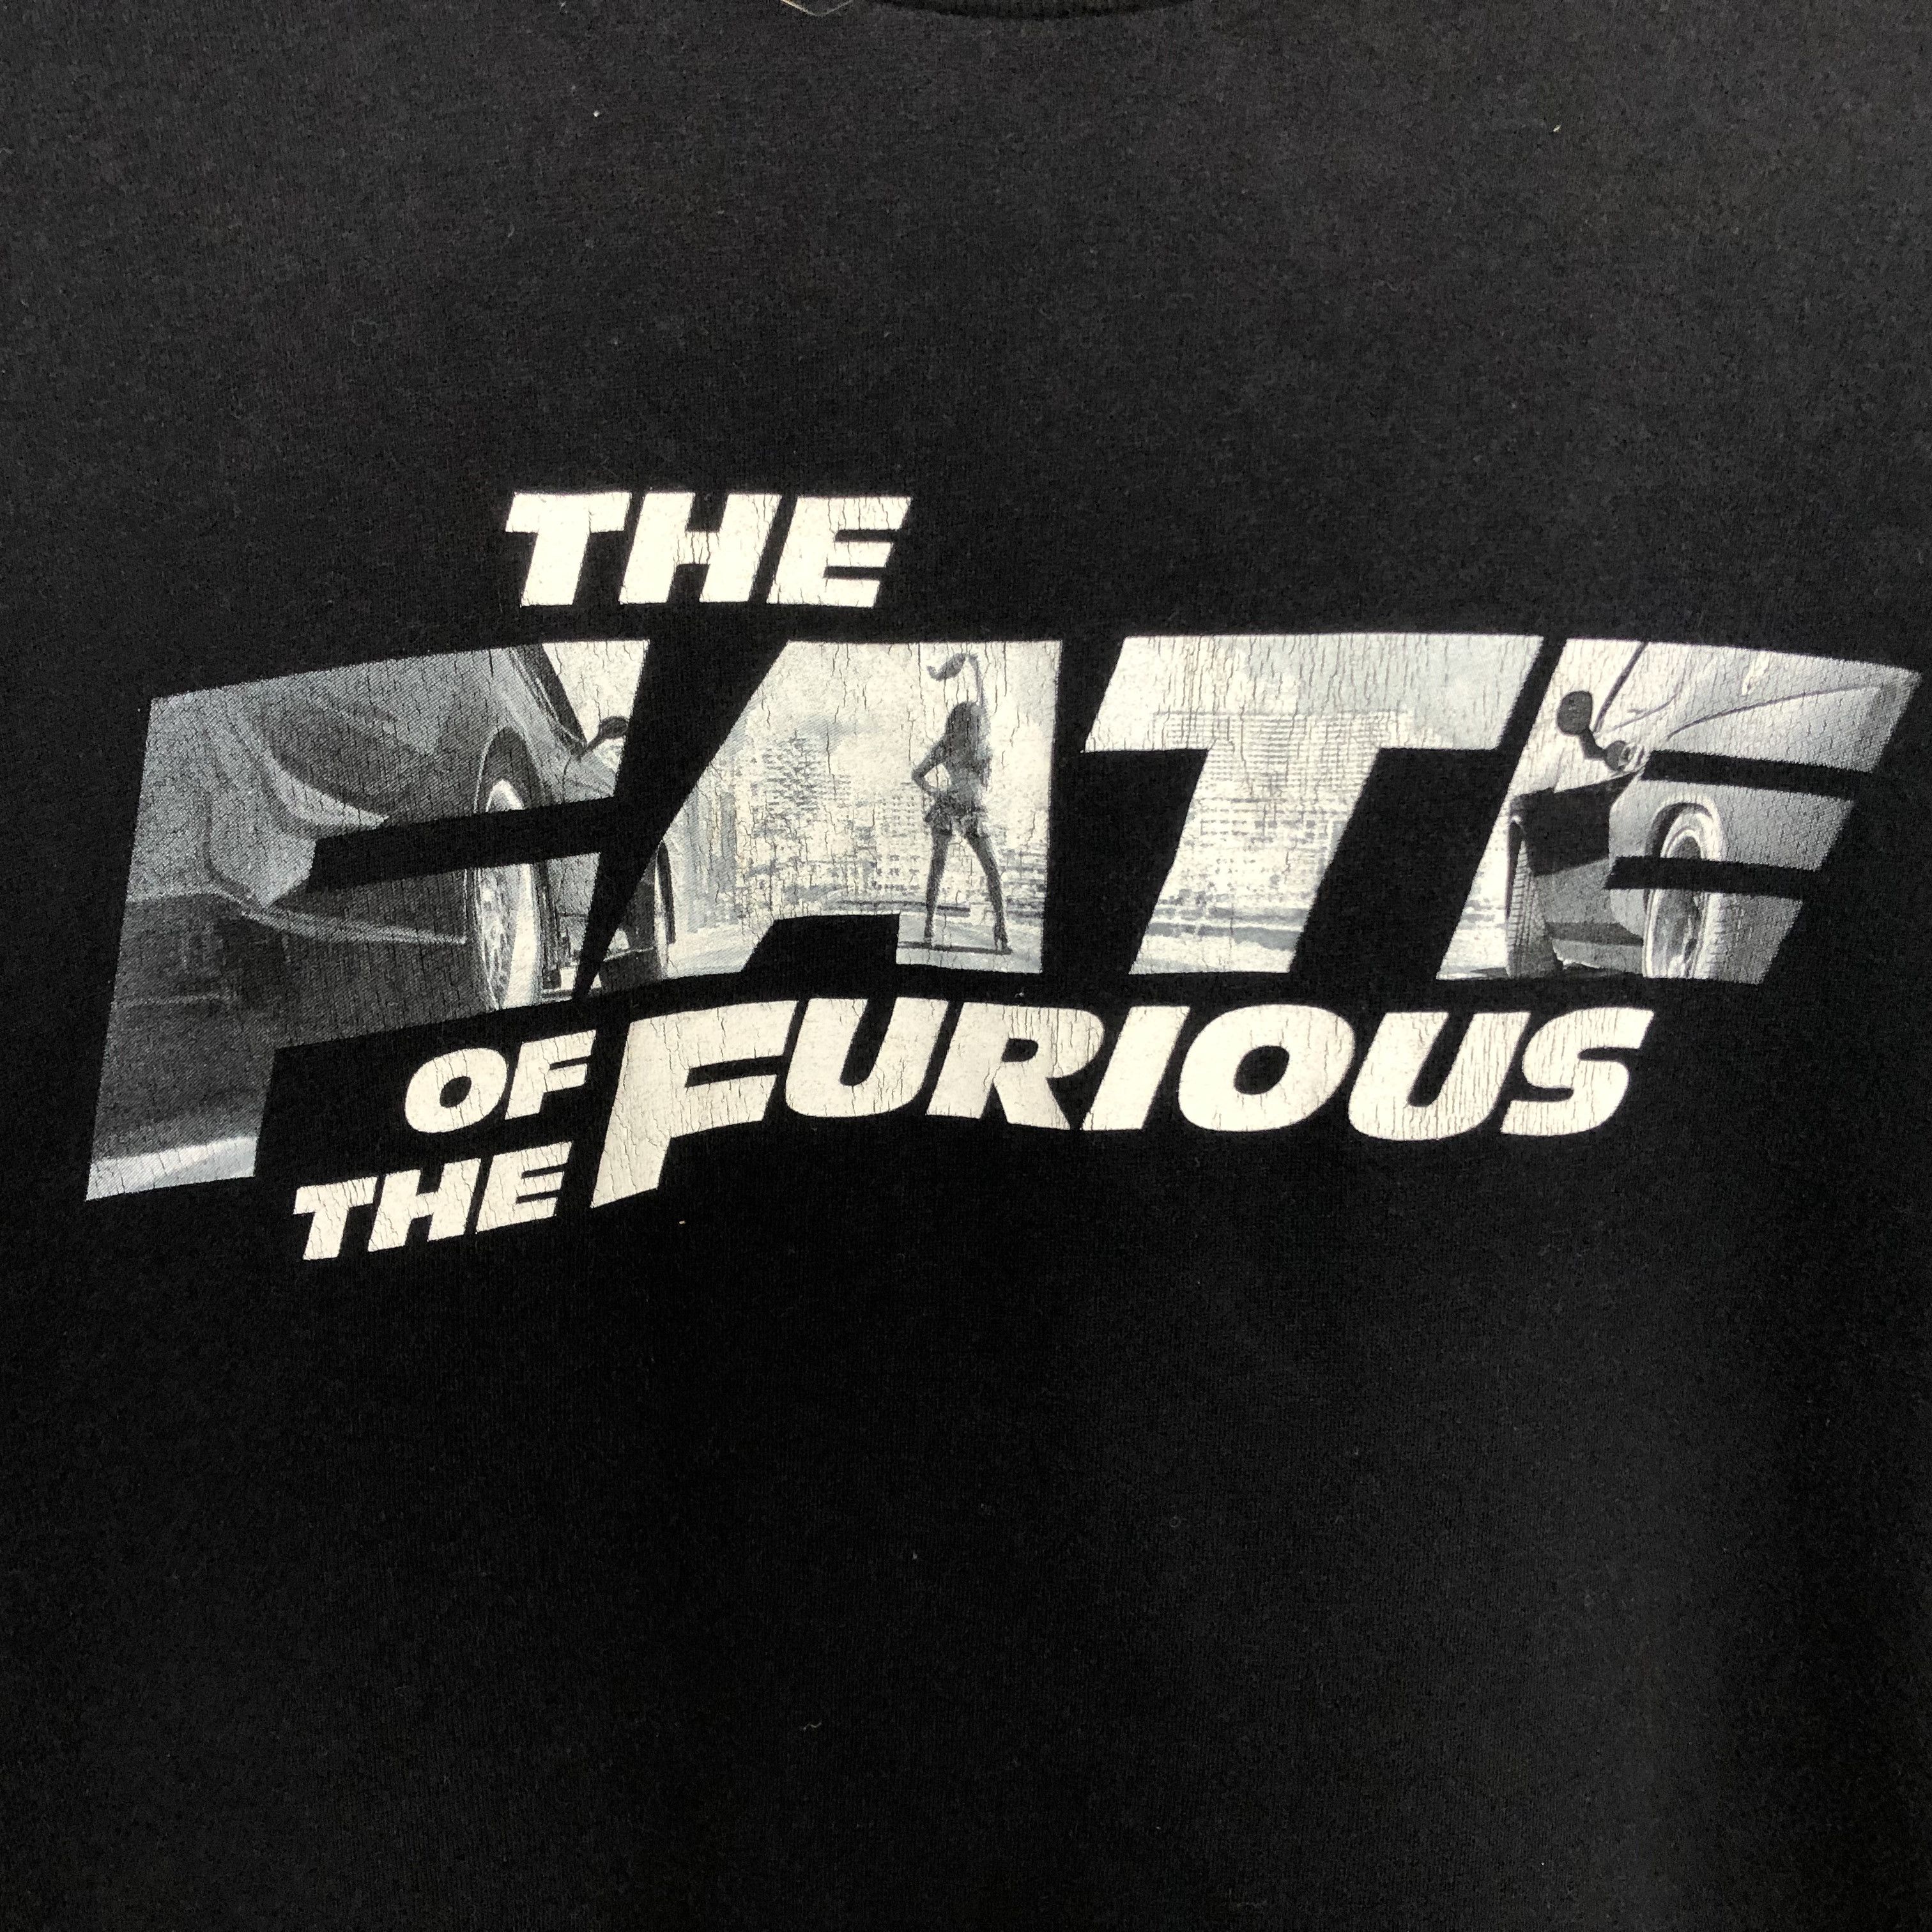 Vintage Vintage The Fast & Furious American Racing Movie Tshirt Size US L / EU 52-54 / 3 - 2 Preview